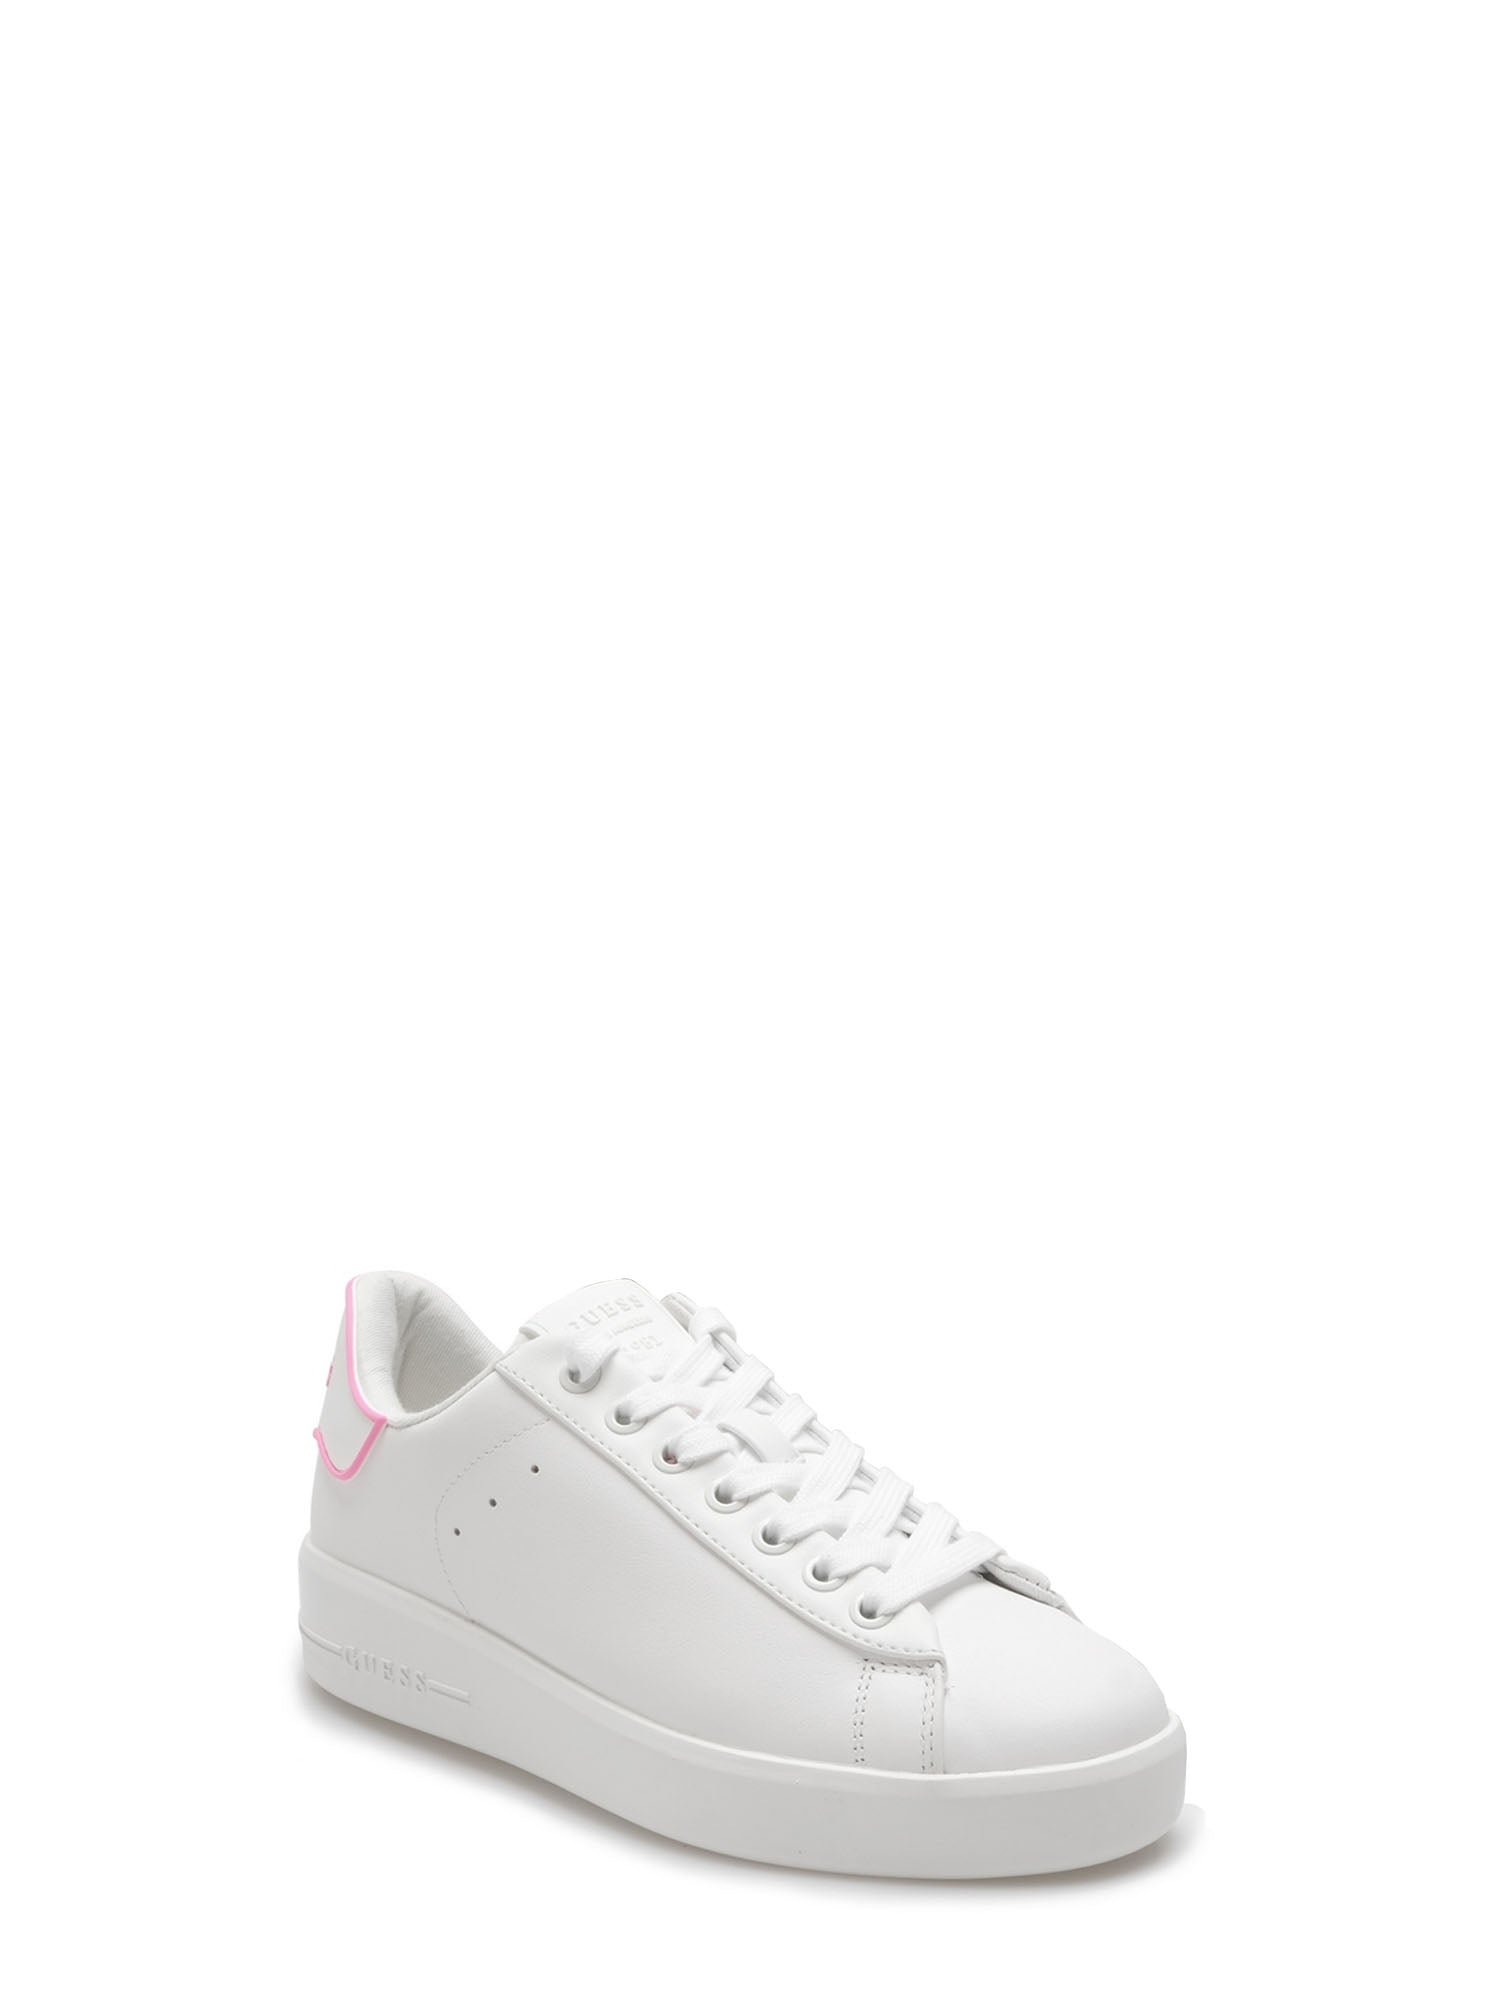 GUESS JEANS SNEAKERS ROCKIES BIANCO - FUXIA